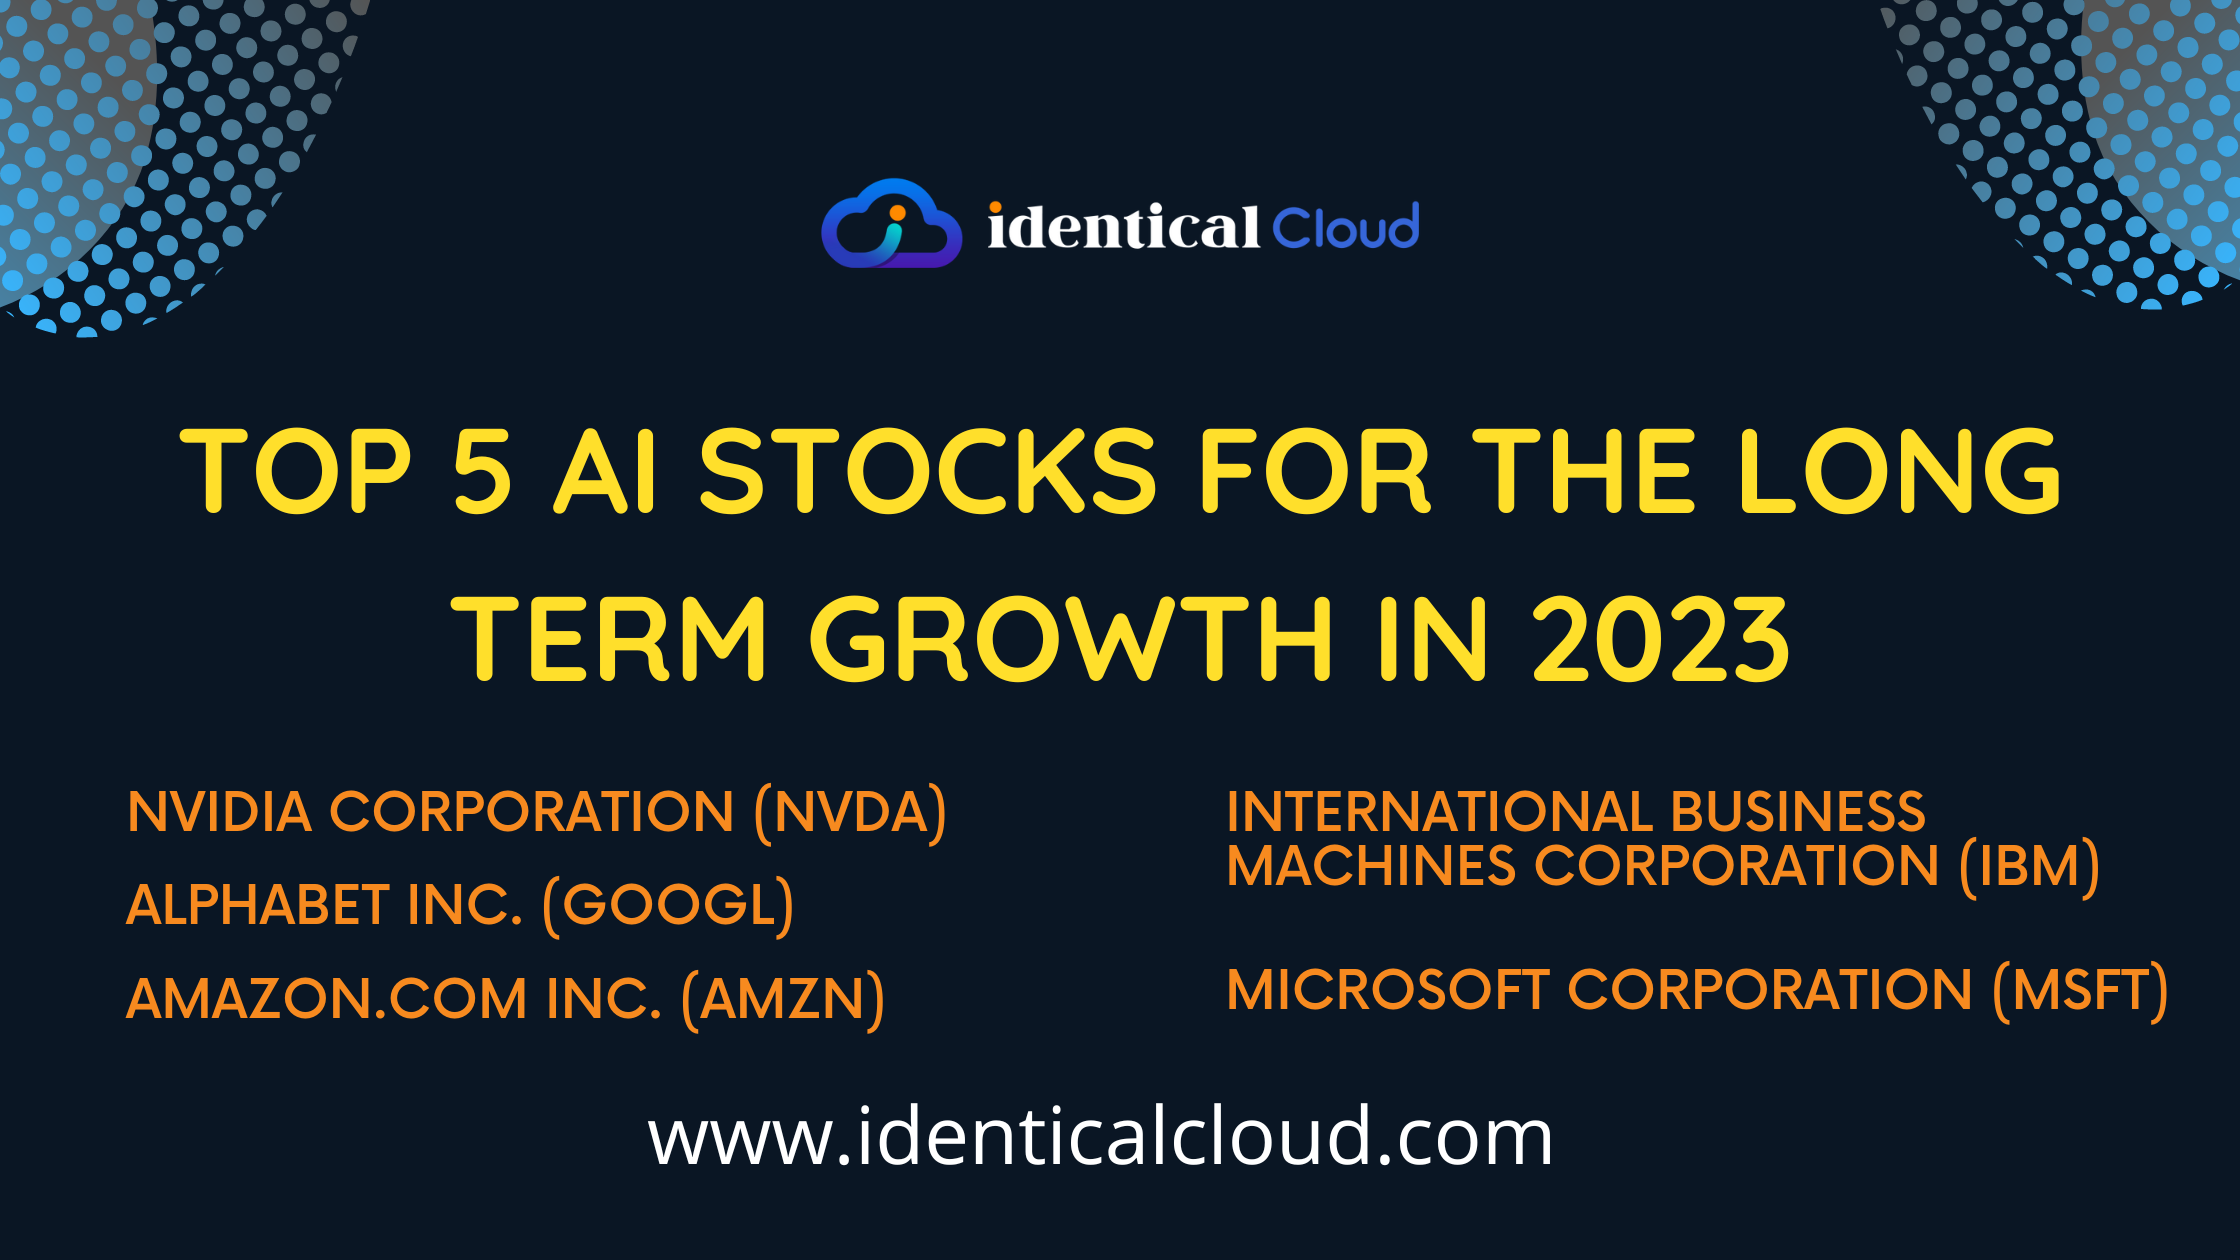 Top 5 AI Stocks for the Long Term Growth in 2023 - identicalcloud.com